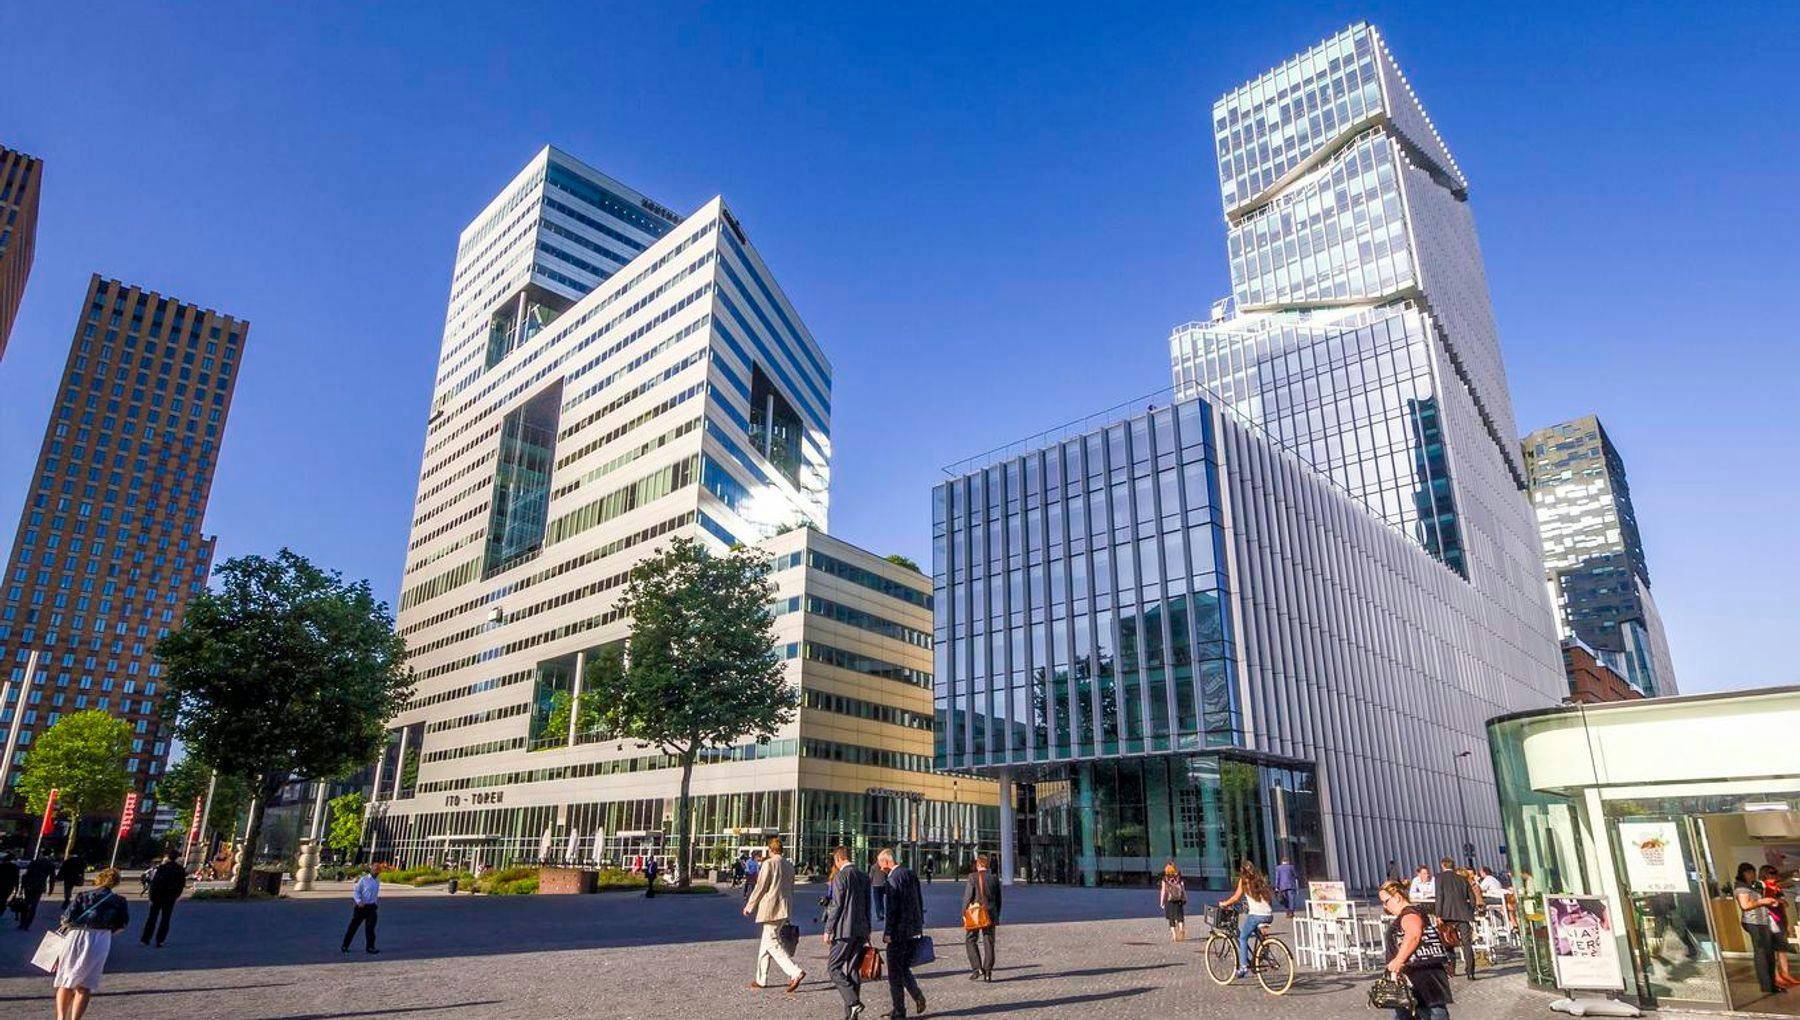 The main financial, economic and judicial center in Amsterdam, commonly known as the 'Zuidas' on a sunny day.